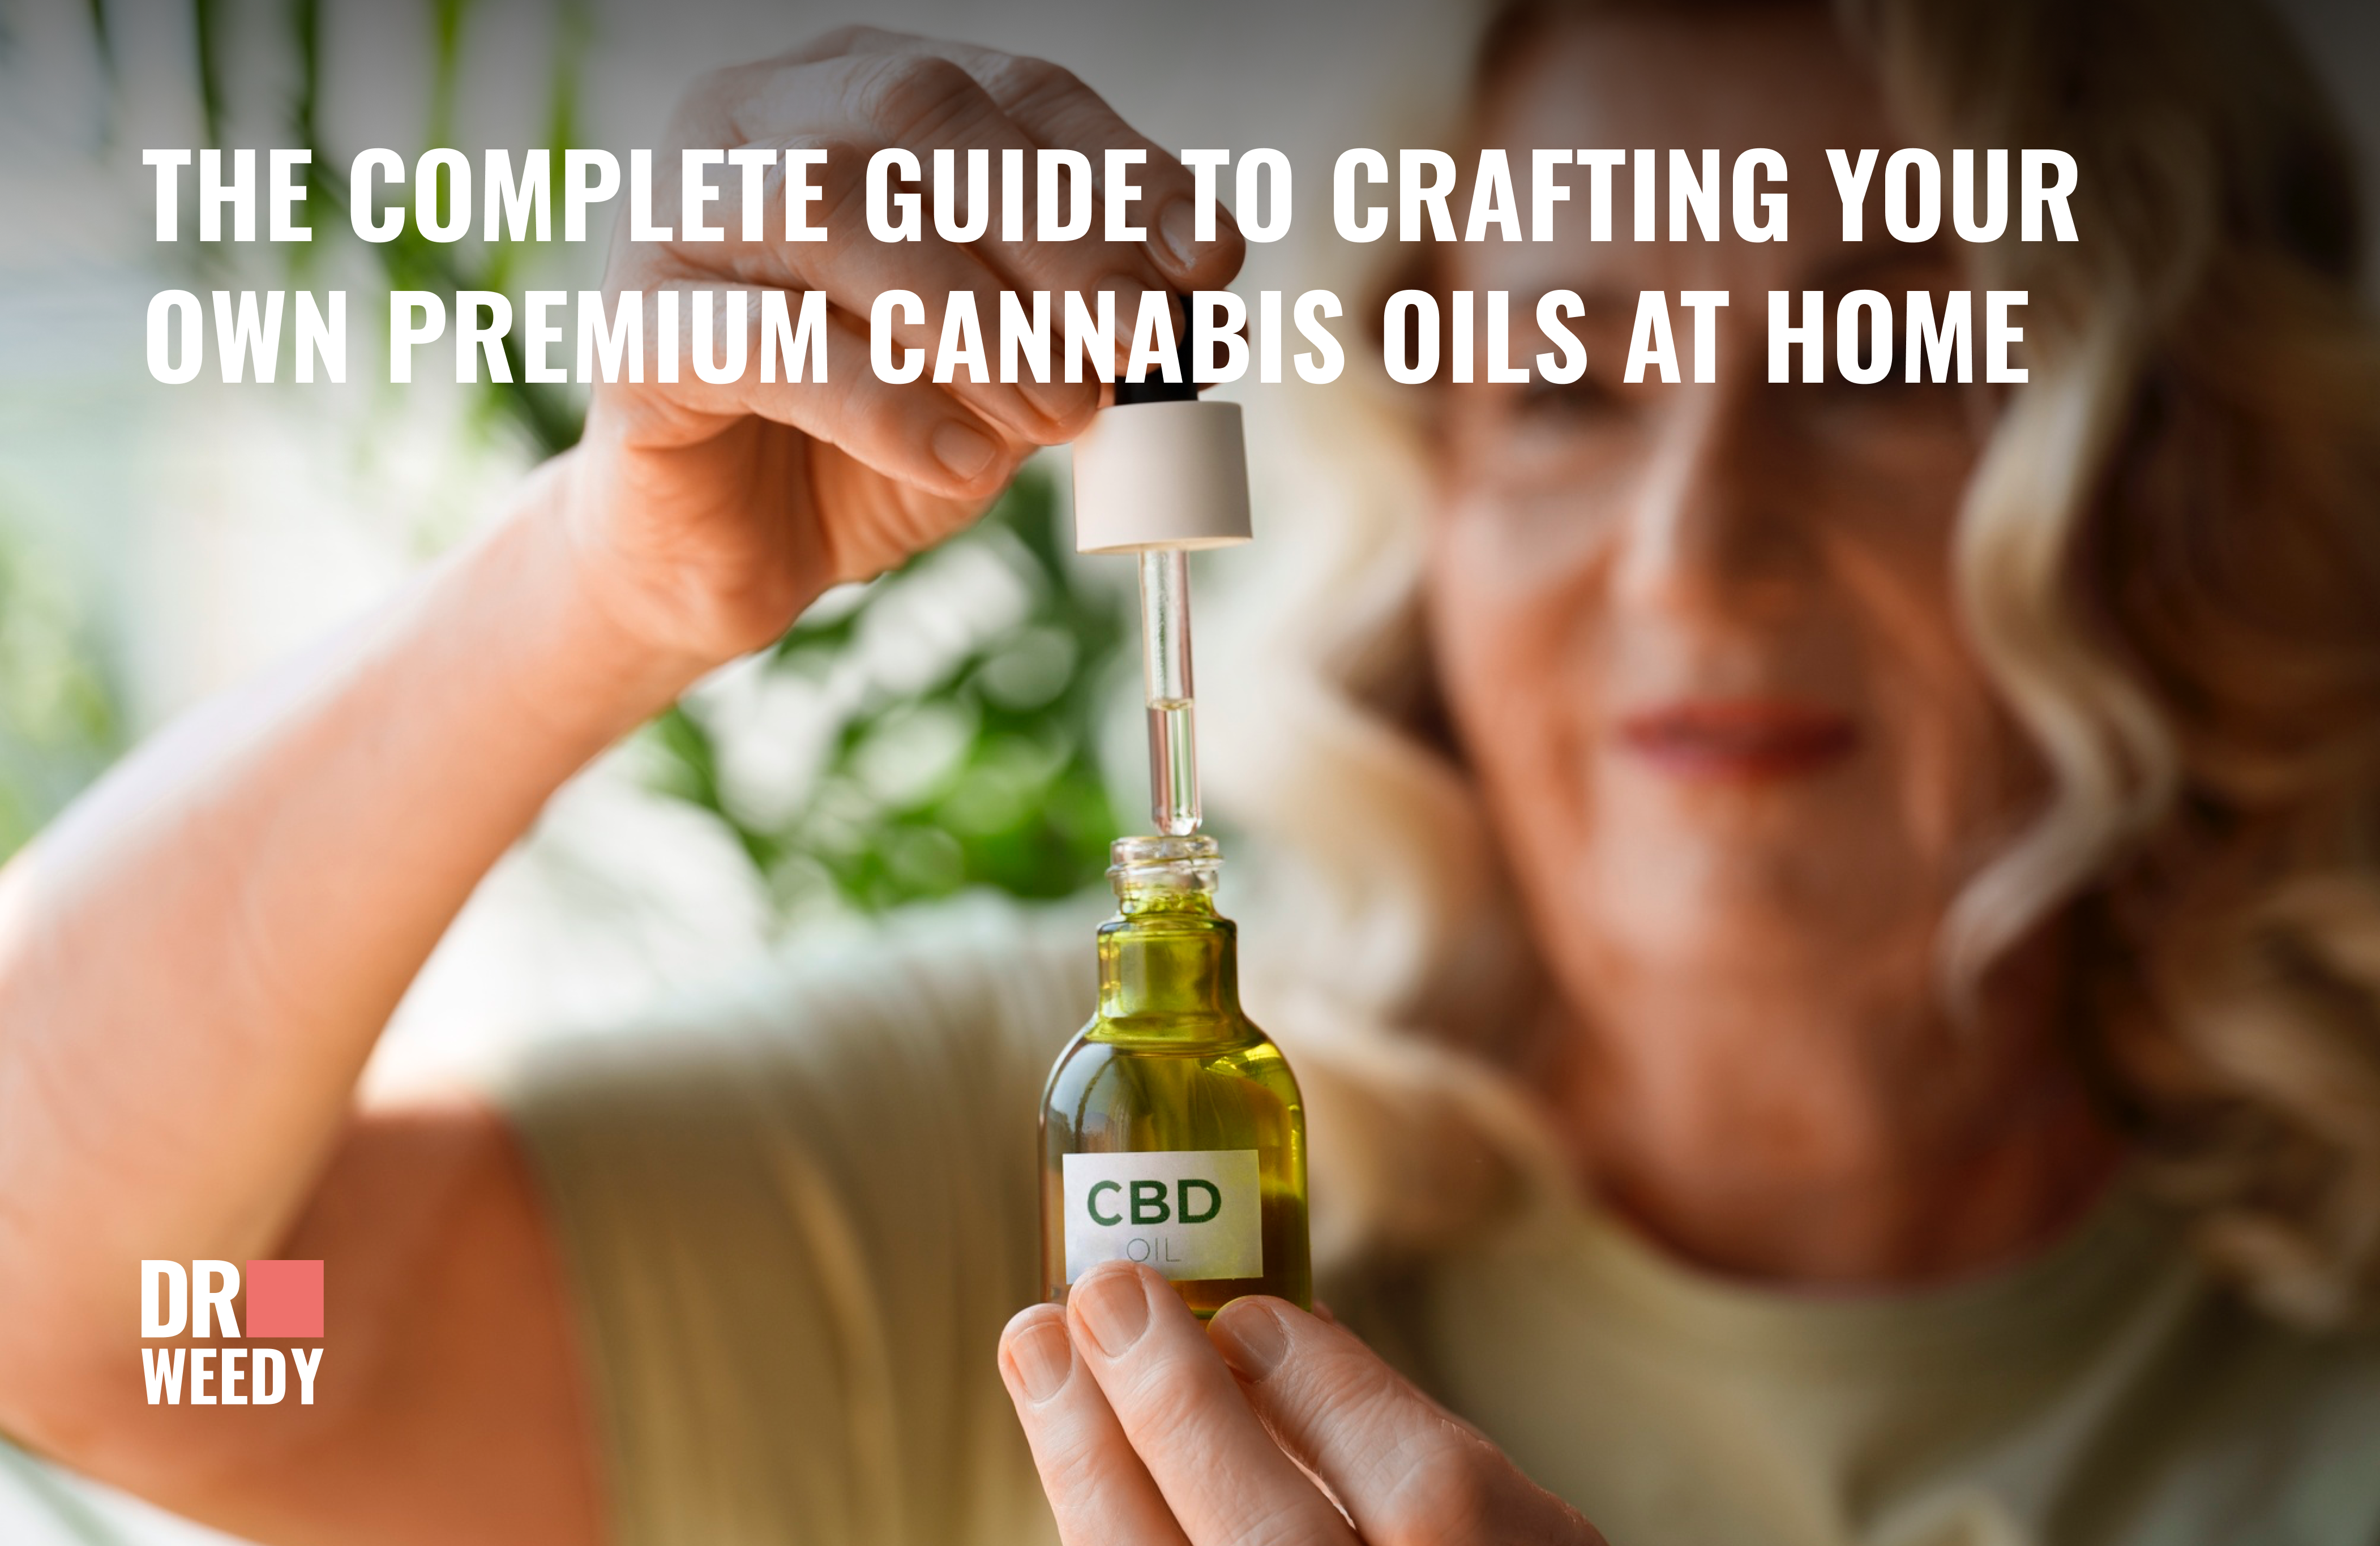 The Complete Guide to Crafting Your Own Premium Cannabis Oils at Home